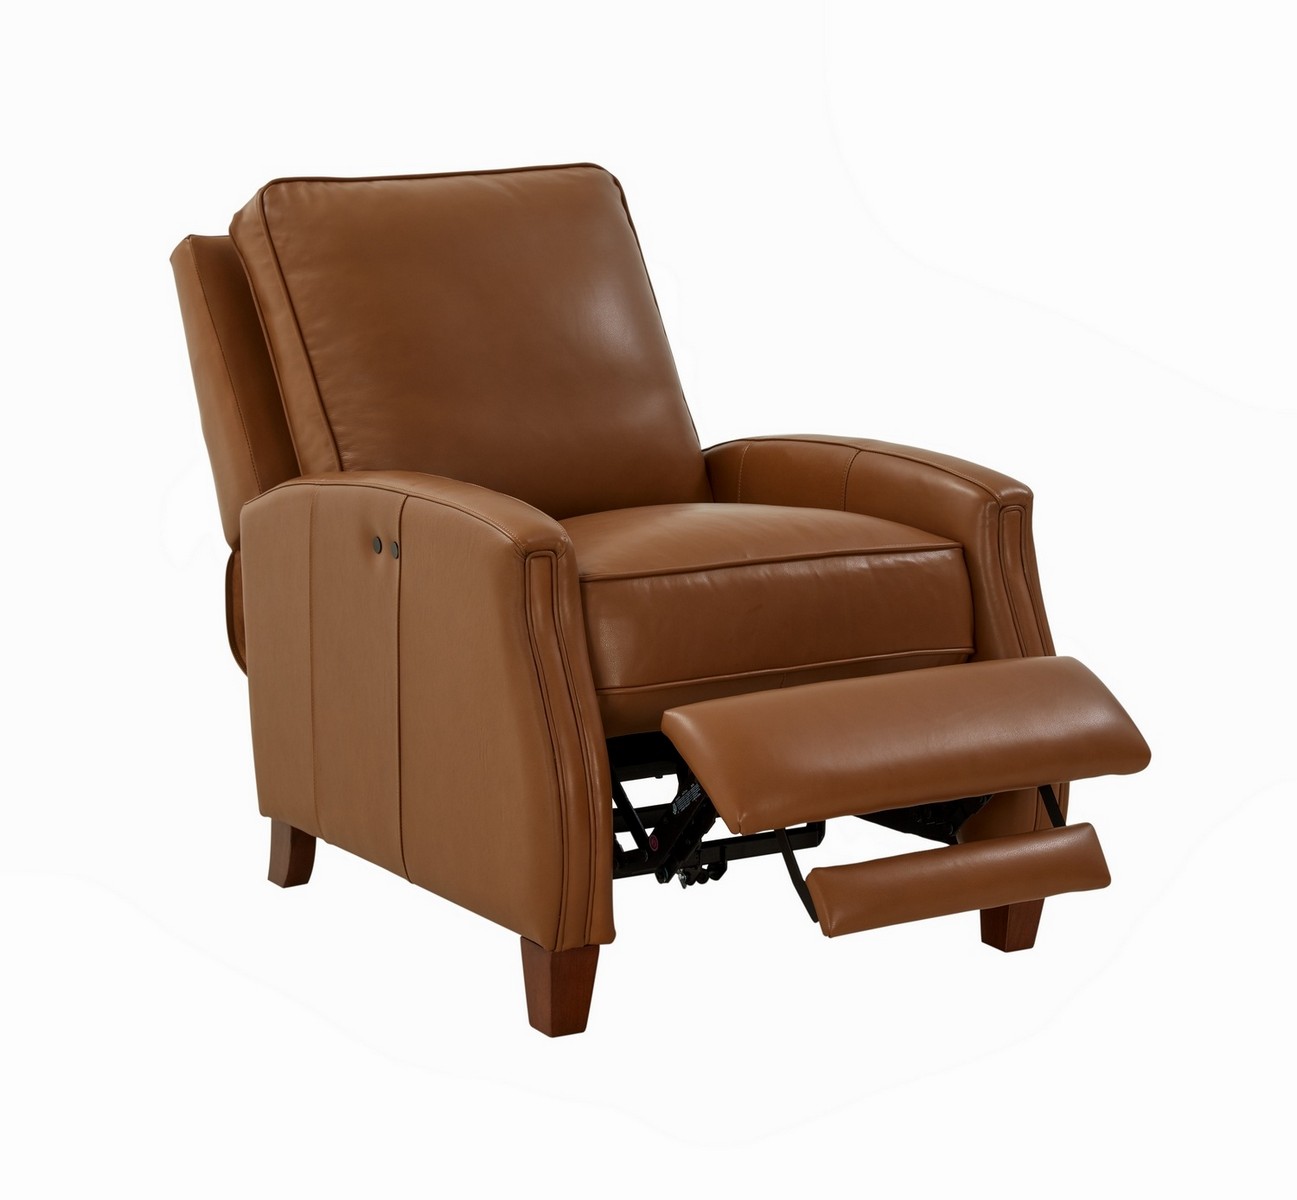 Barcalounger Penrose Power Recliner Chair - Shoreham Ponytail/All Leather